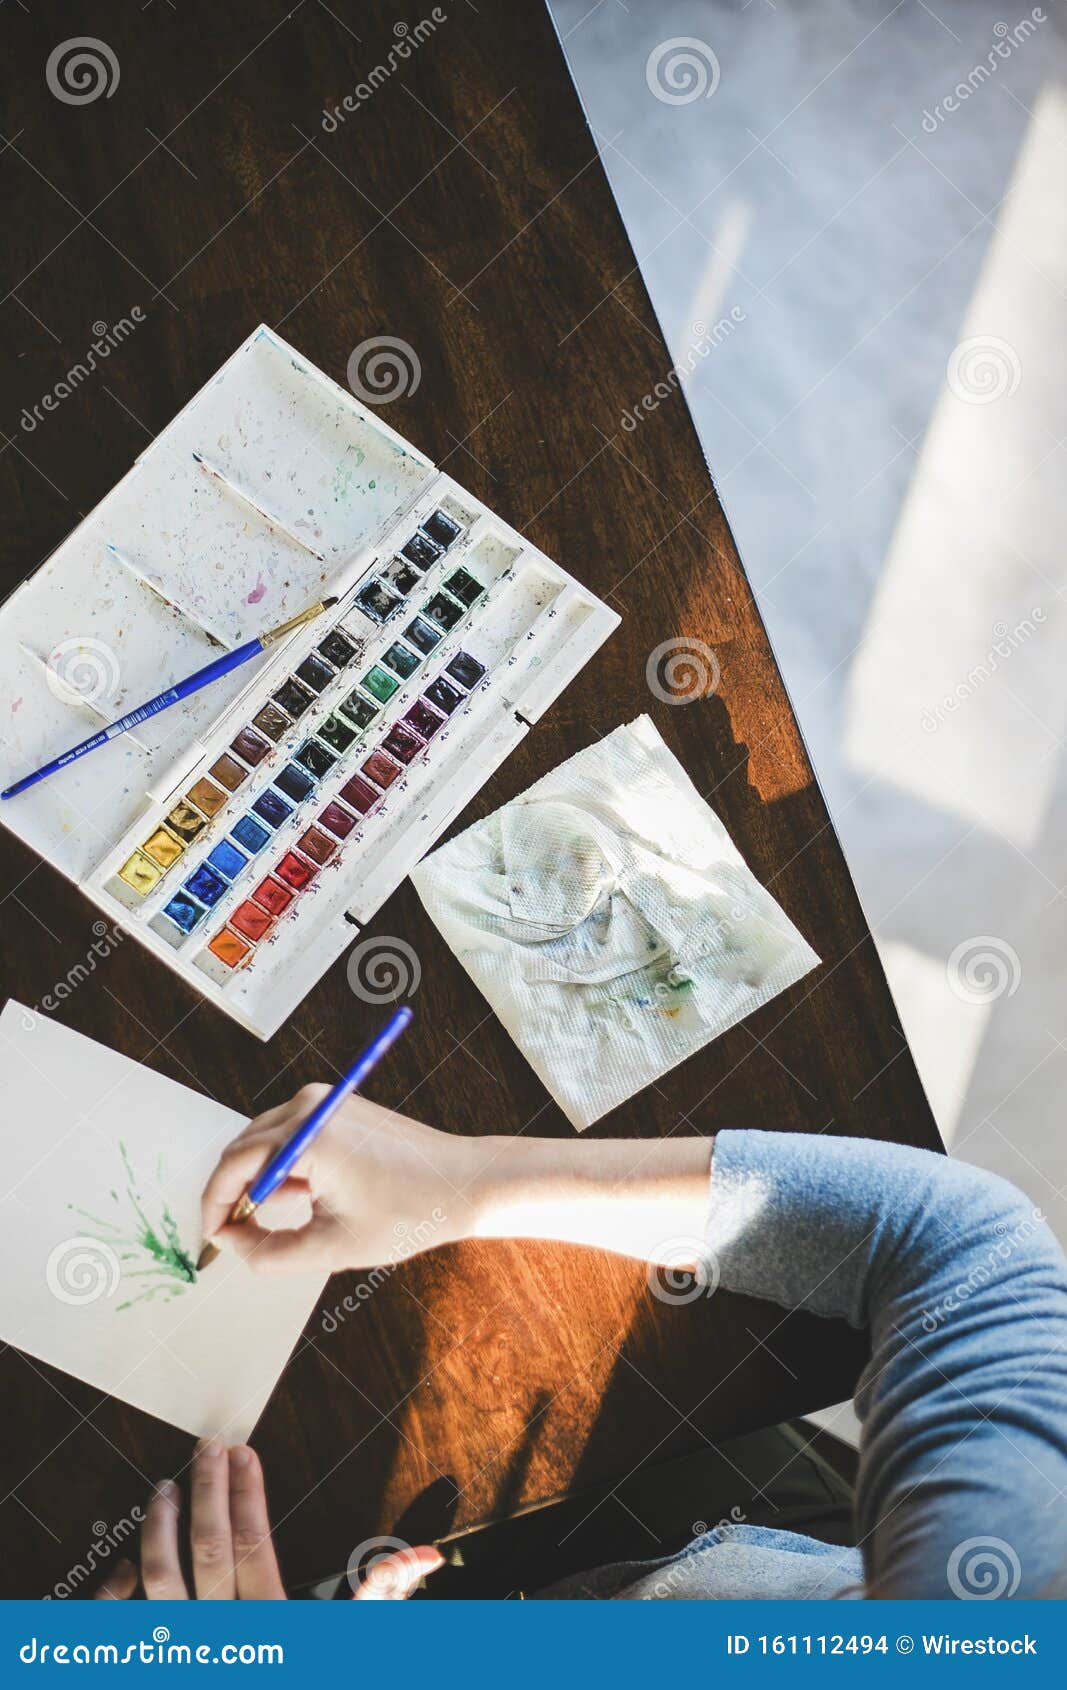 Overhead Shot of a Person Painting with Watercolors and a White ...